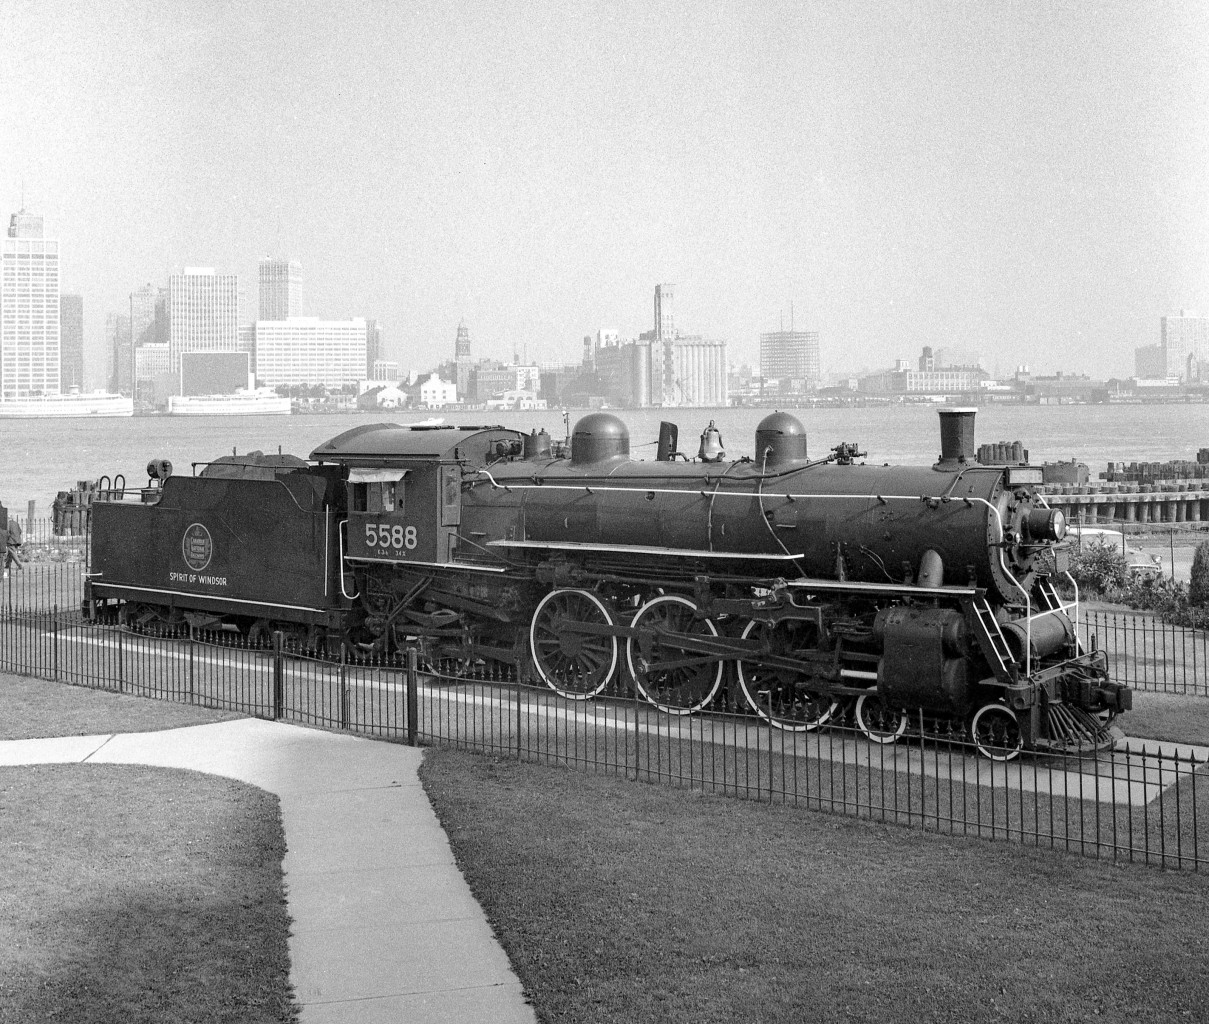 CN 5588 "Spirit of Windsor" sits in a park in Windsor, Ontario in the late 1960's/early 1970's. In the background is the Detroit skyline.